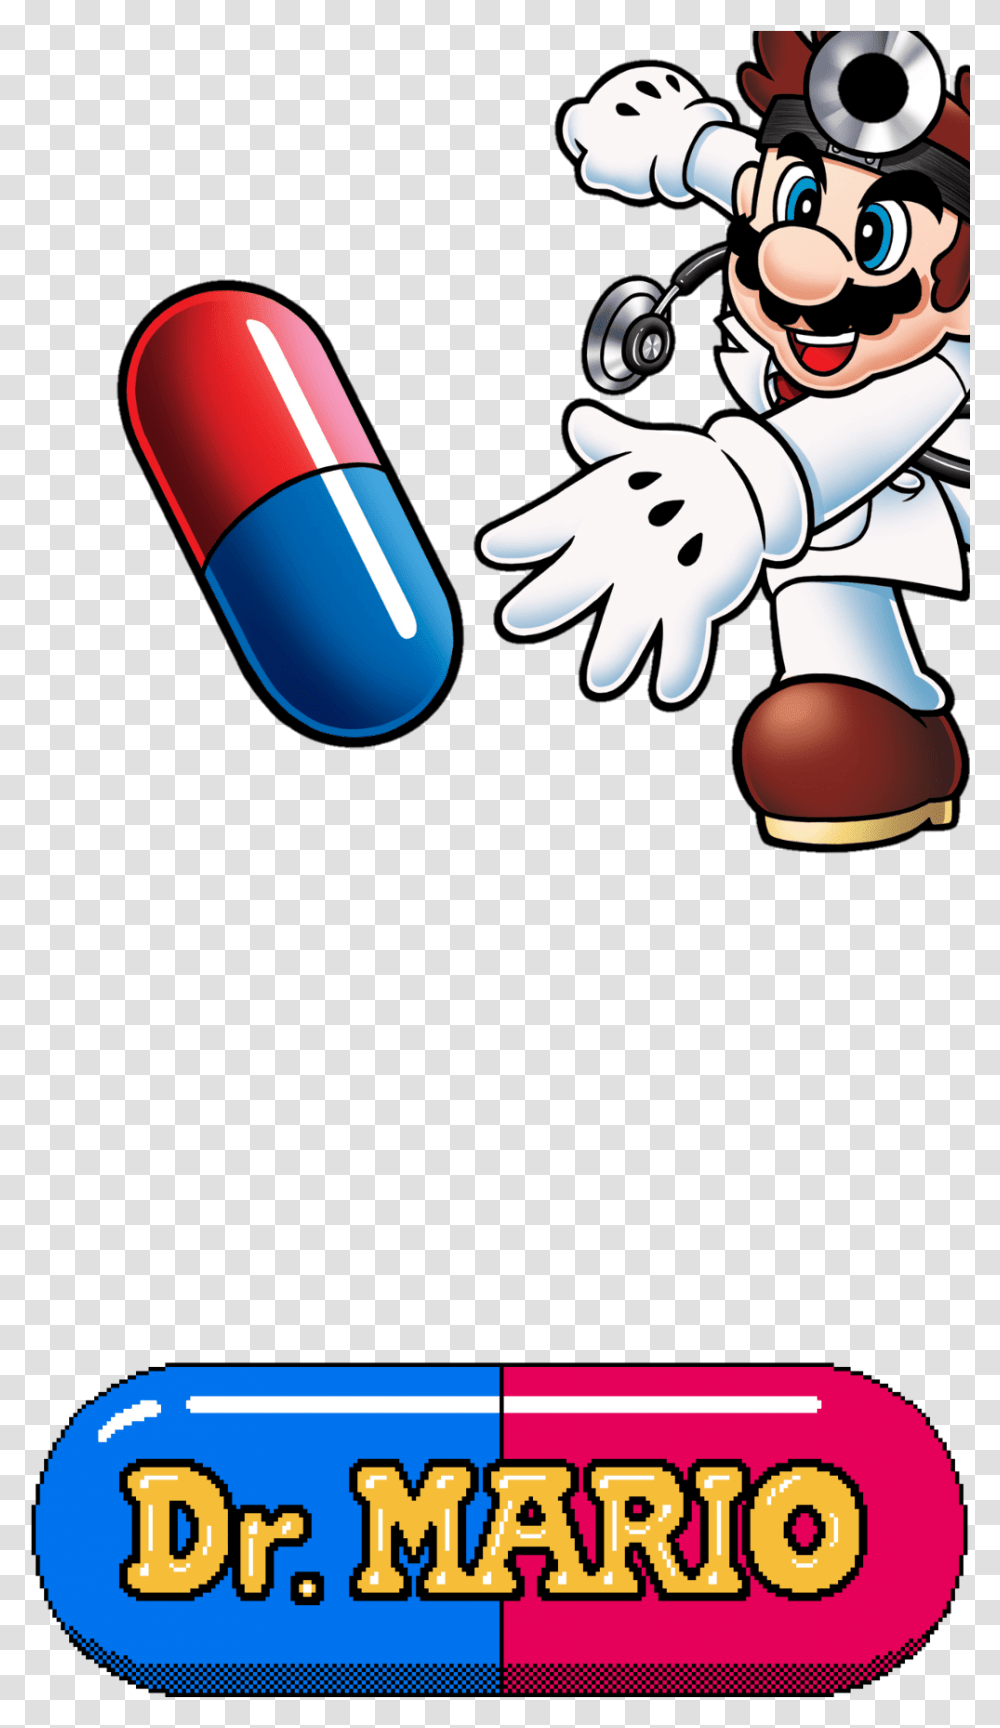 Hole Punch Wallpaper Galaxy S10 Plus, Medication, Pill, Capsule Transparent Png